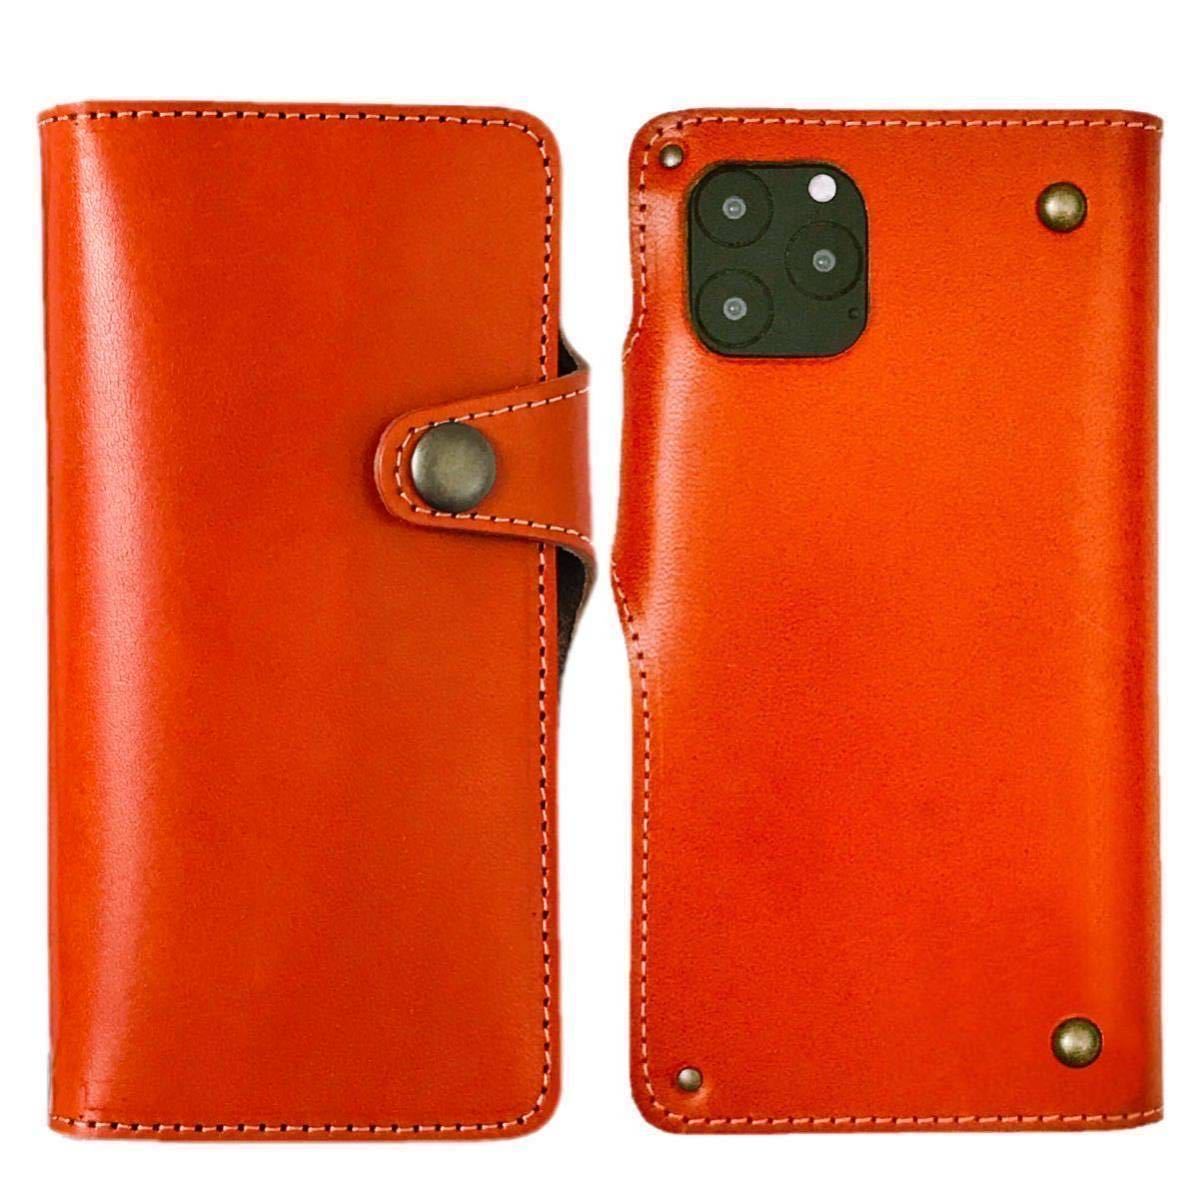 * Tochigi leather iPhone14 Pro Max cow leather smartphone case notebook type cover original leather leather orange vo- Noah two wheels made in Japan *